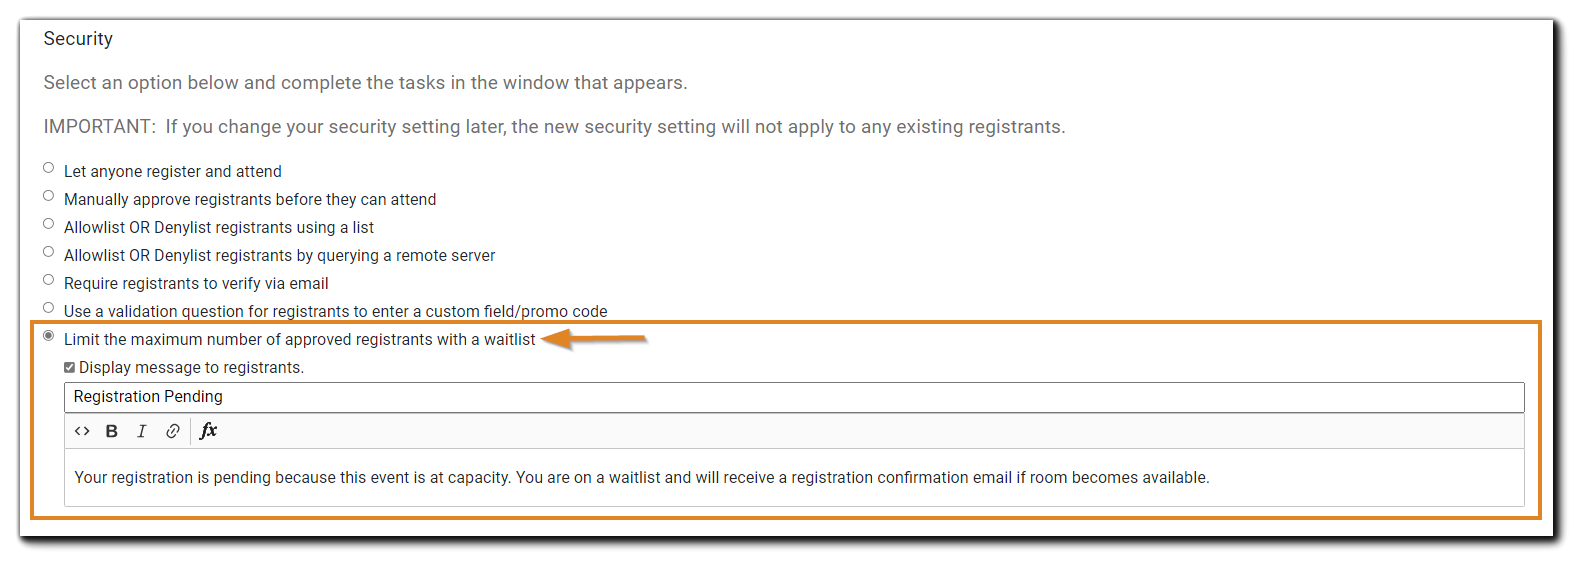 Screenshot: Security option 'Limit the maximum number of approved registrants with a waitlist' selected and highlighted.